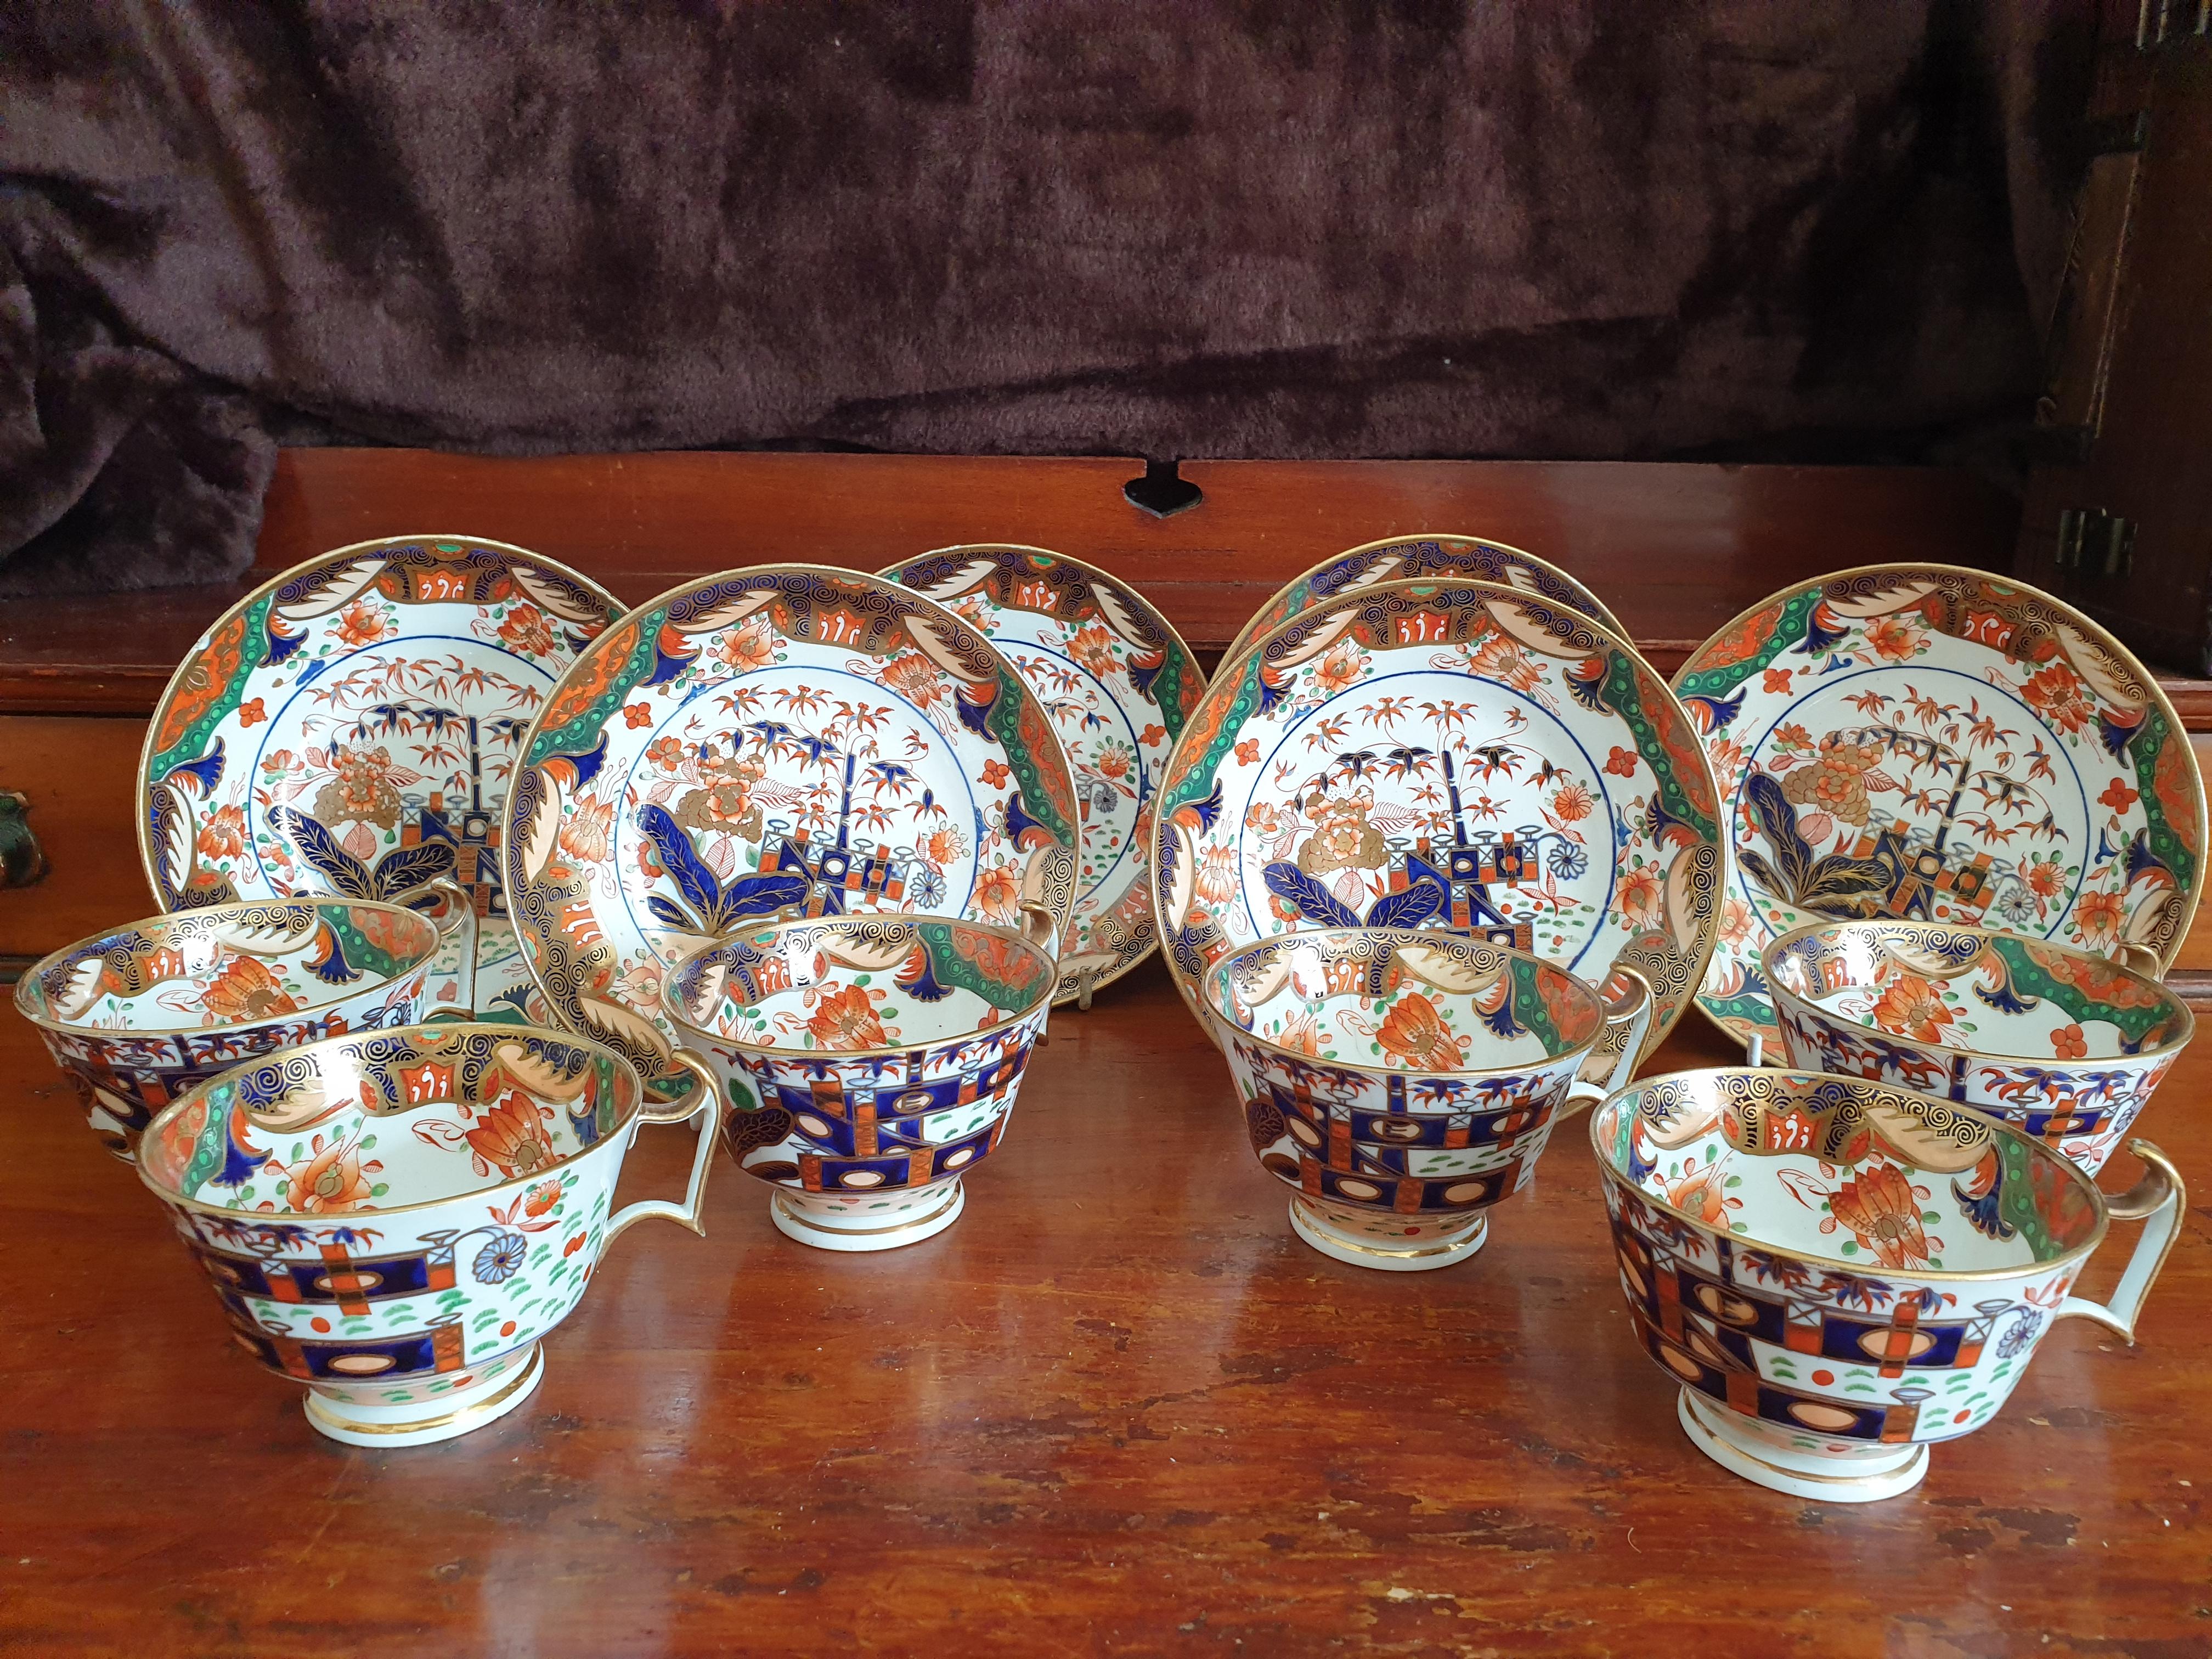 This fabulous teaset includes an early 19th century set of 6 Spode Imari tea cups and saucers, richly painted in the London shape. Abundant gilt detail, blue transfers, red detail, cobalt and peach grounds are overpainted with swaths of enamel in